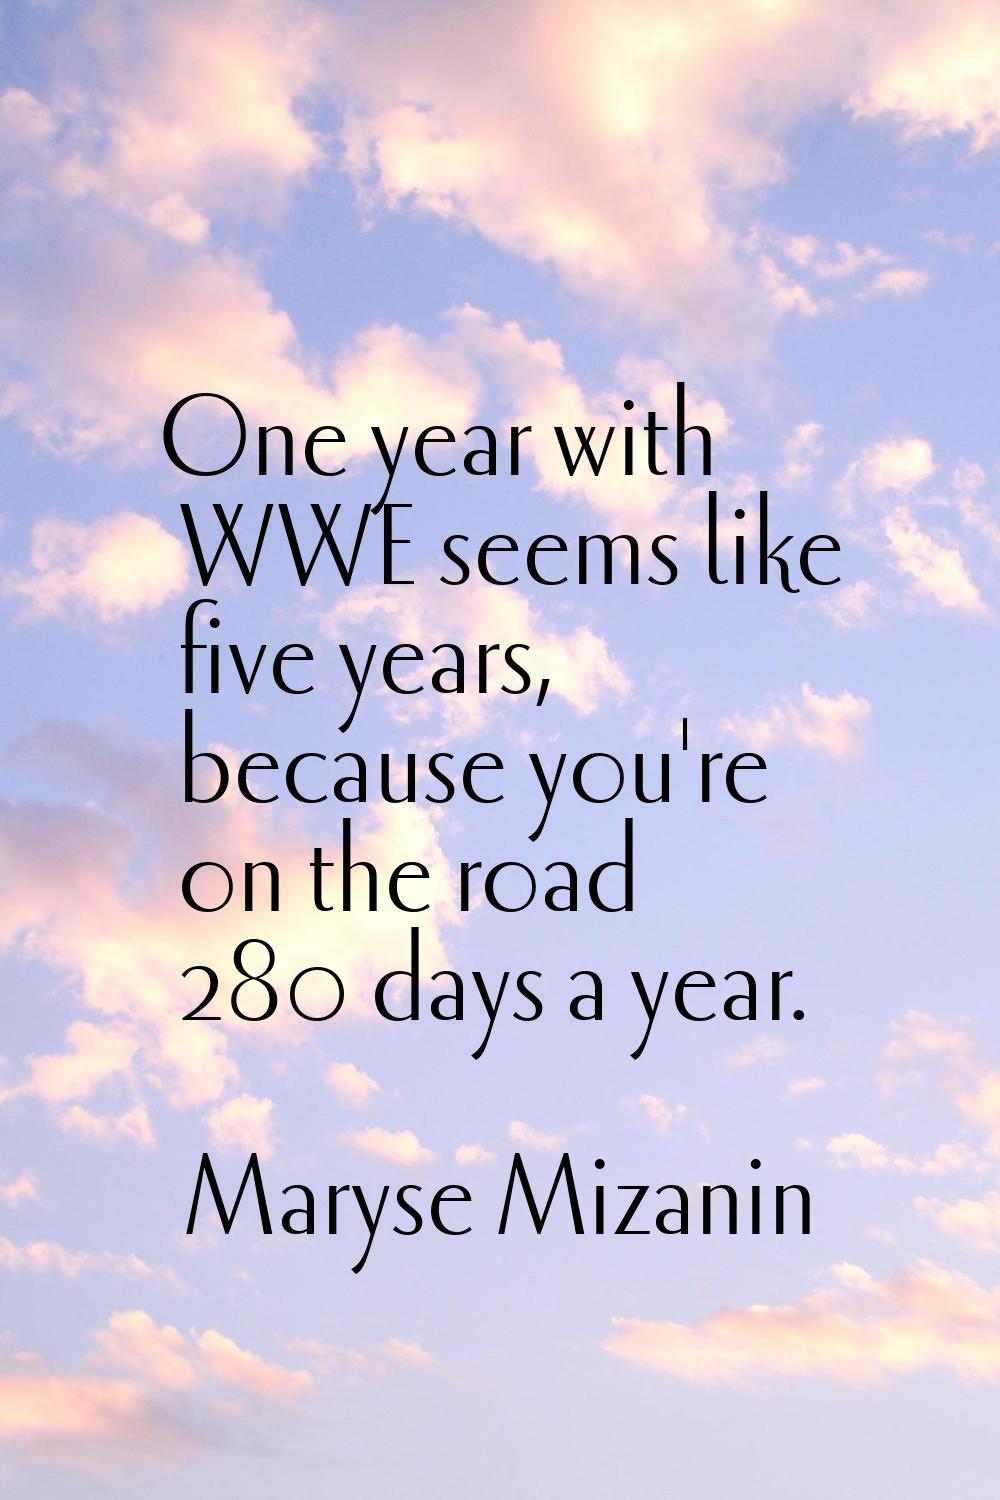 One year with WWE seems like five years, because you're on the road 280 days a year.